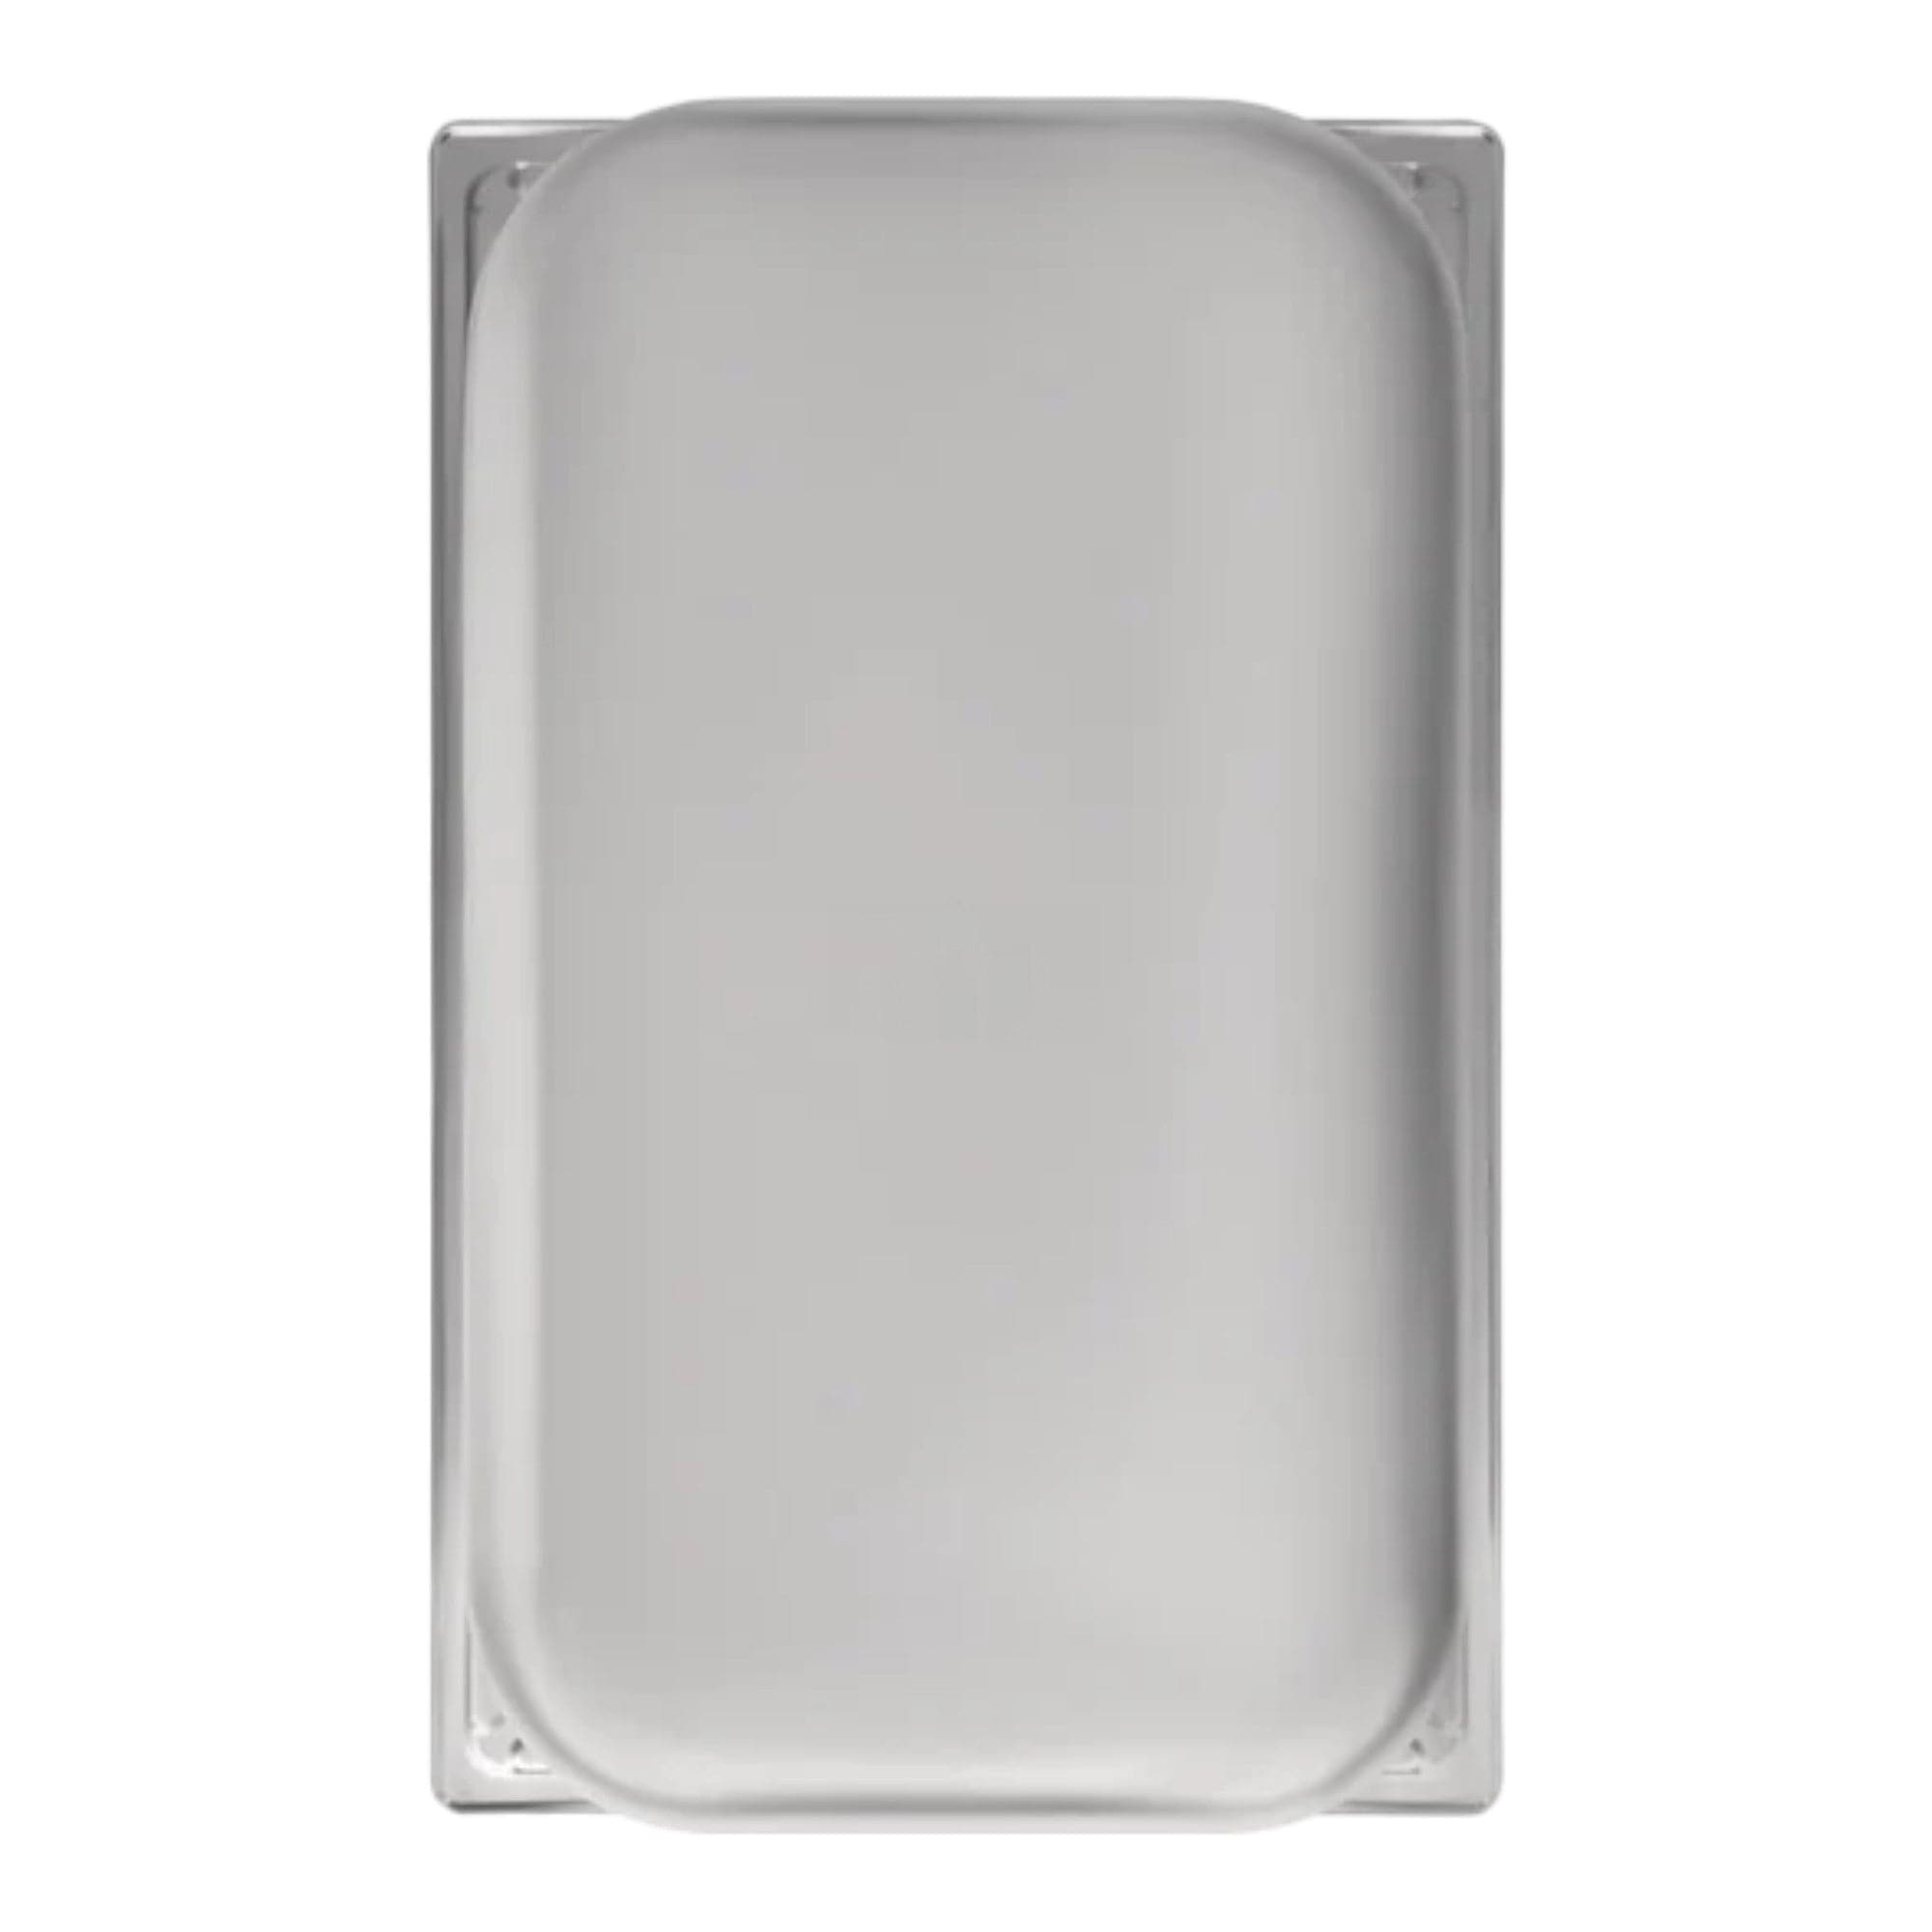 Eson - Stainless Steel Gastronorm Tray 150mm